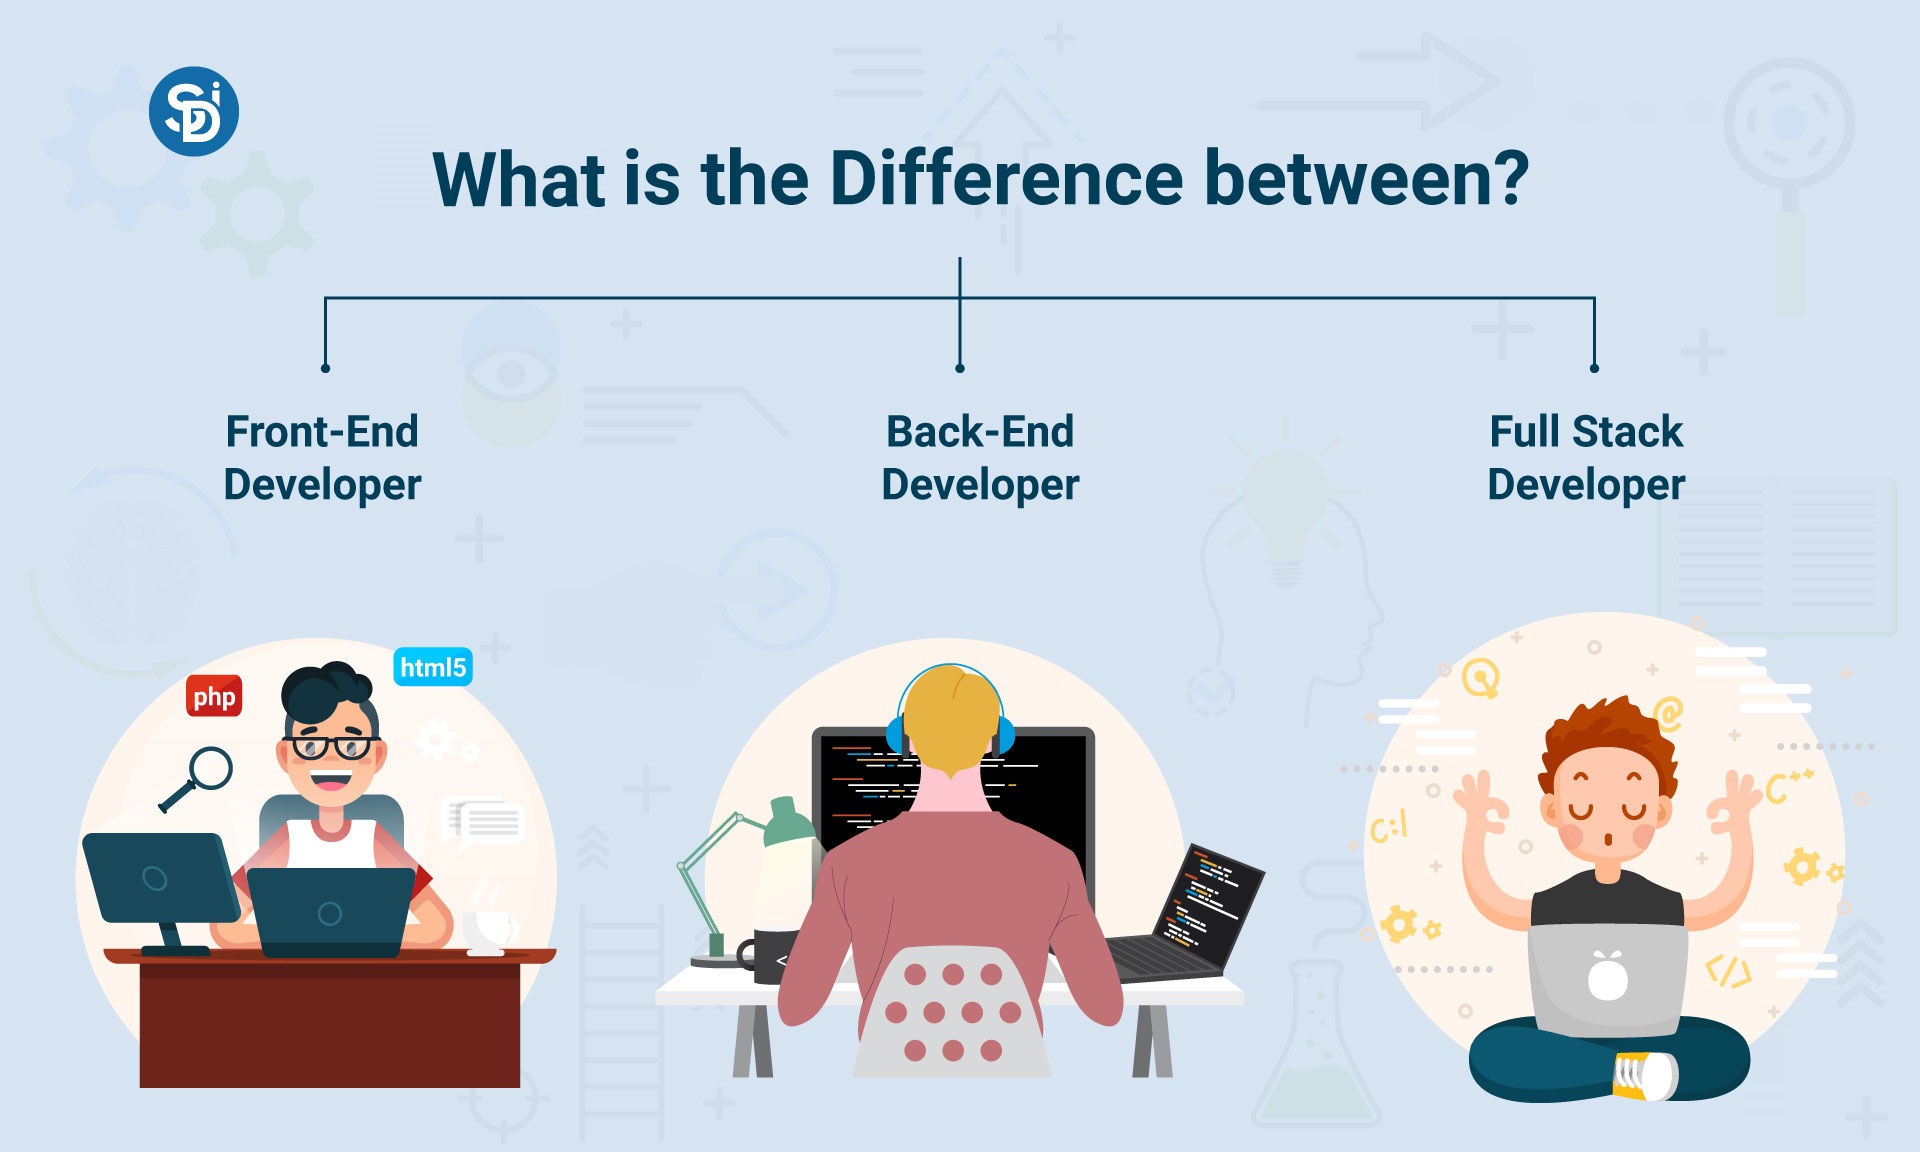 The main differences between front-end, back-end, and full-stack developers